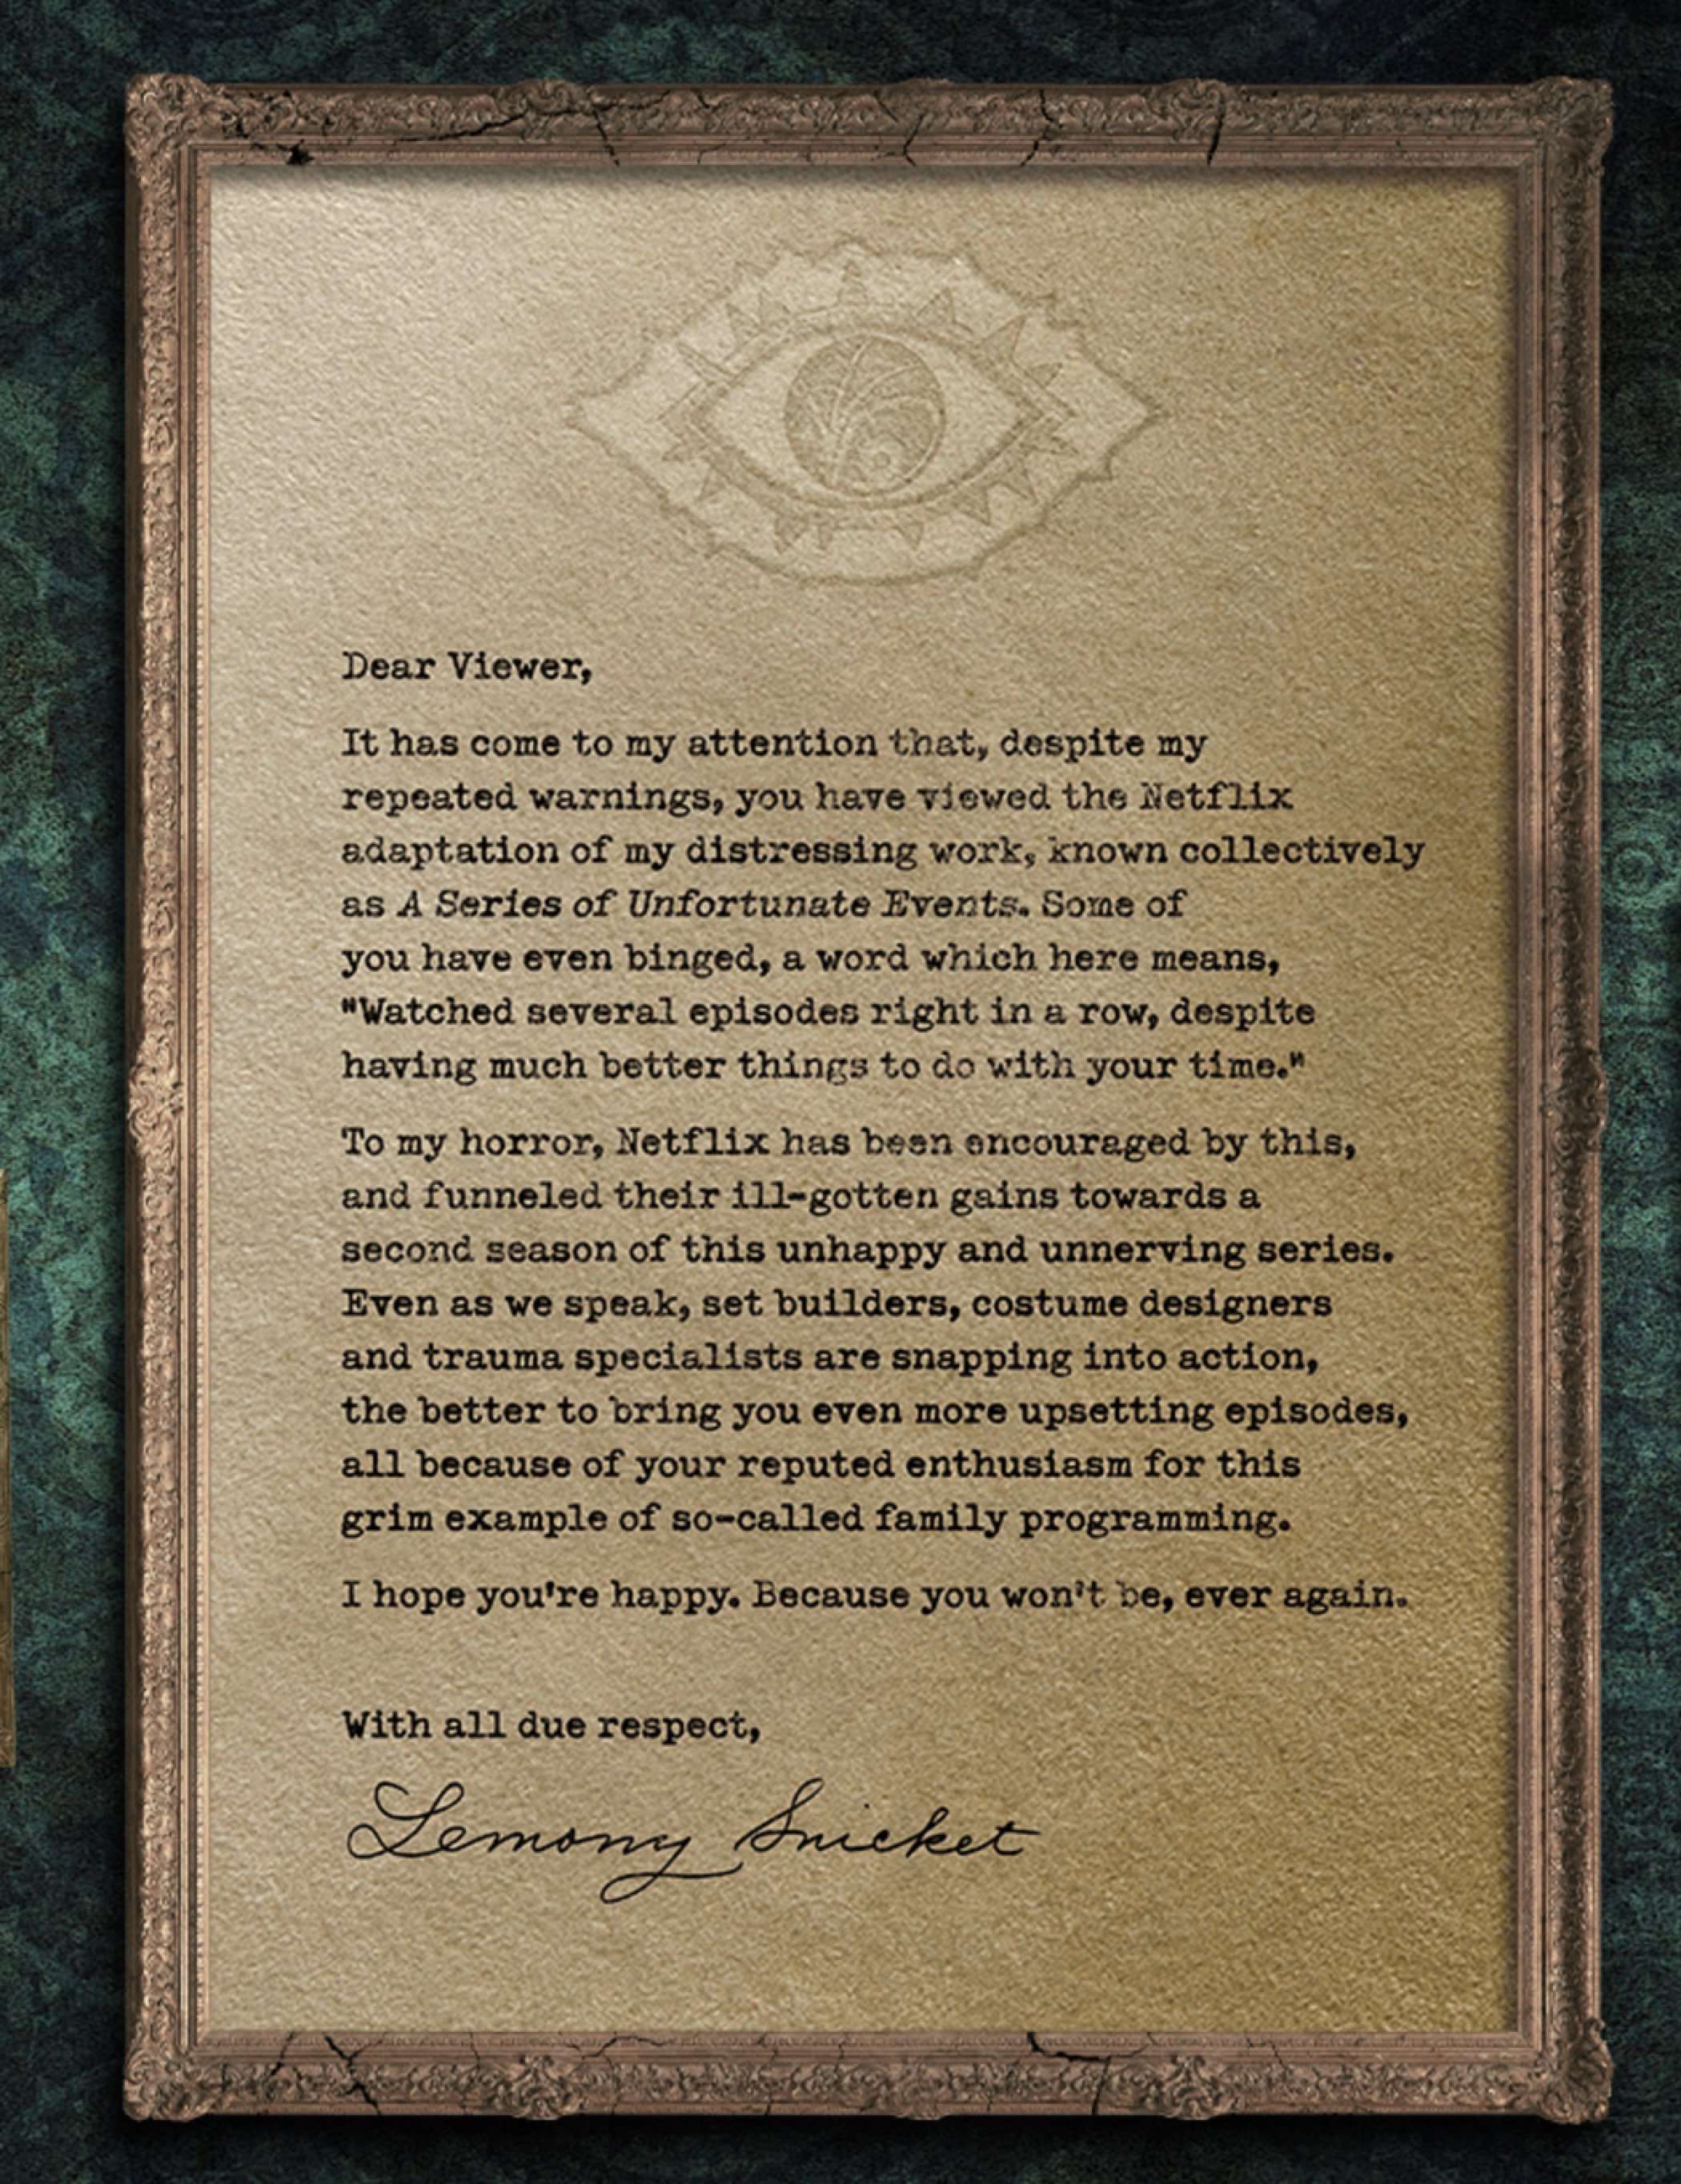 Lemony Snickets Message A Series of Unfortunate Events Season Two